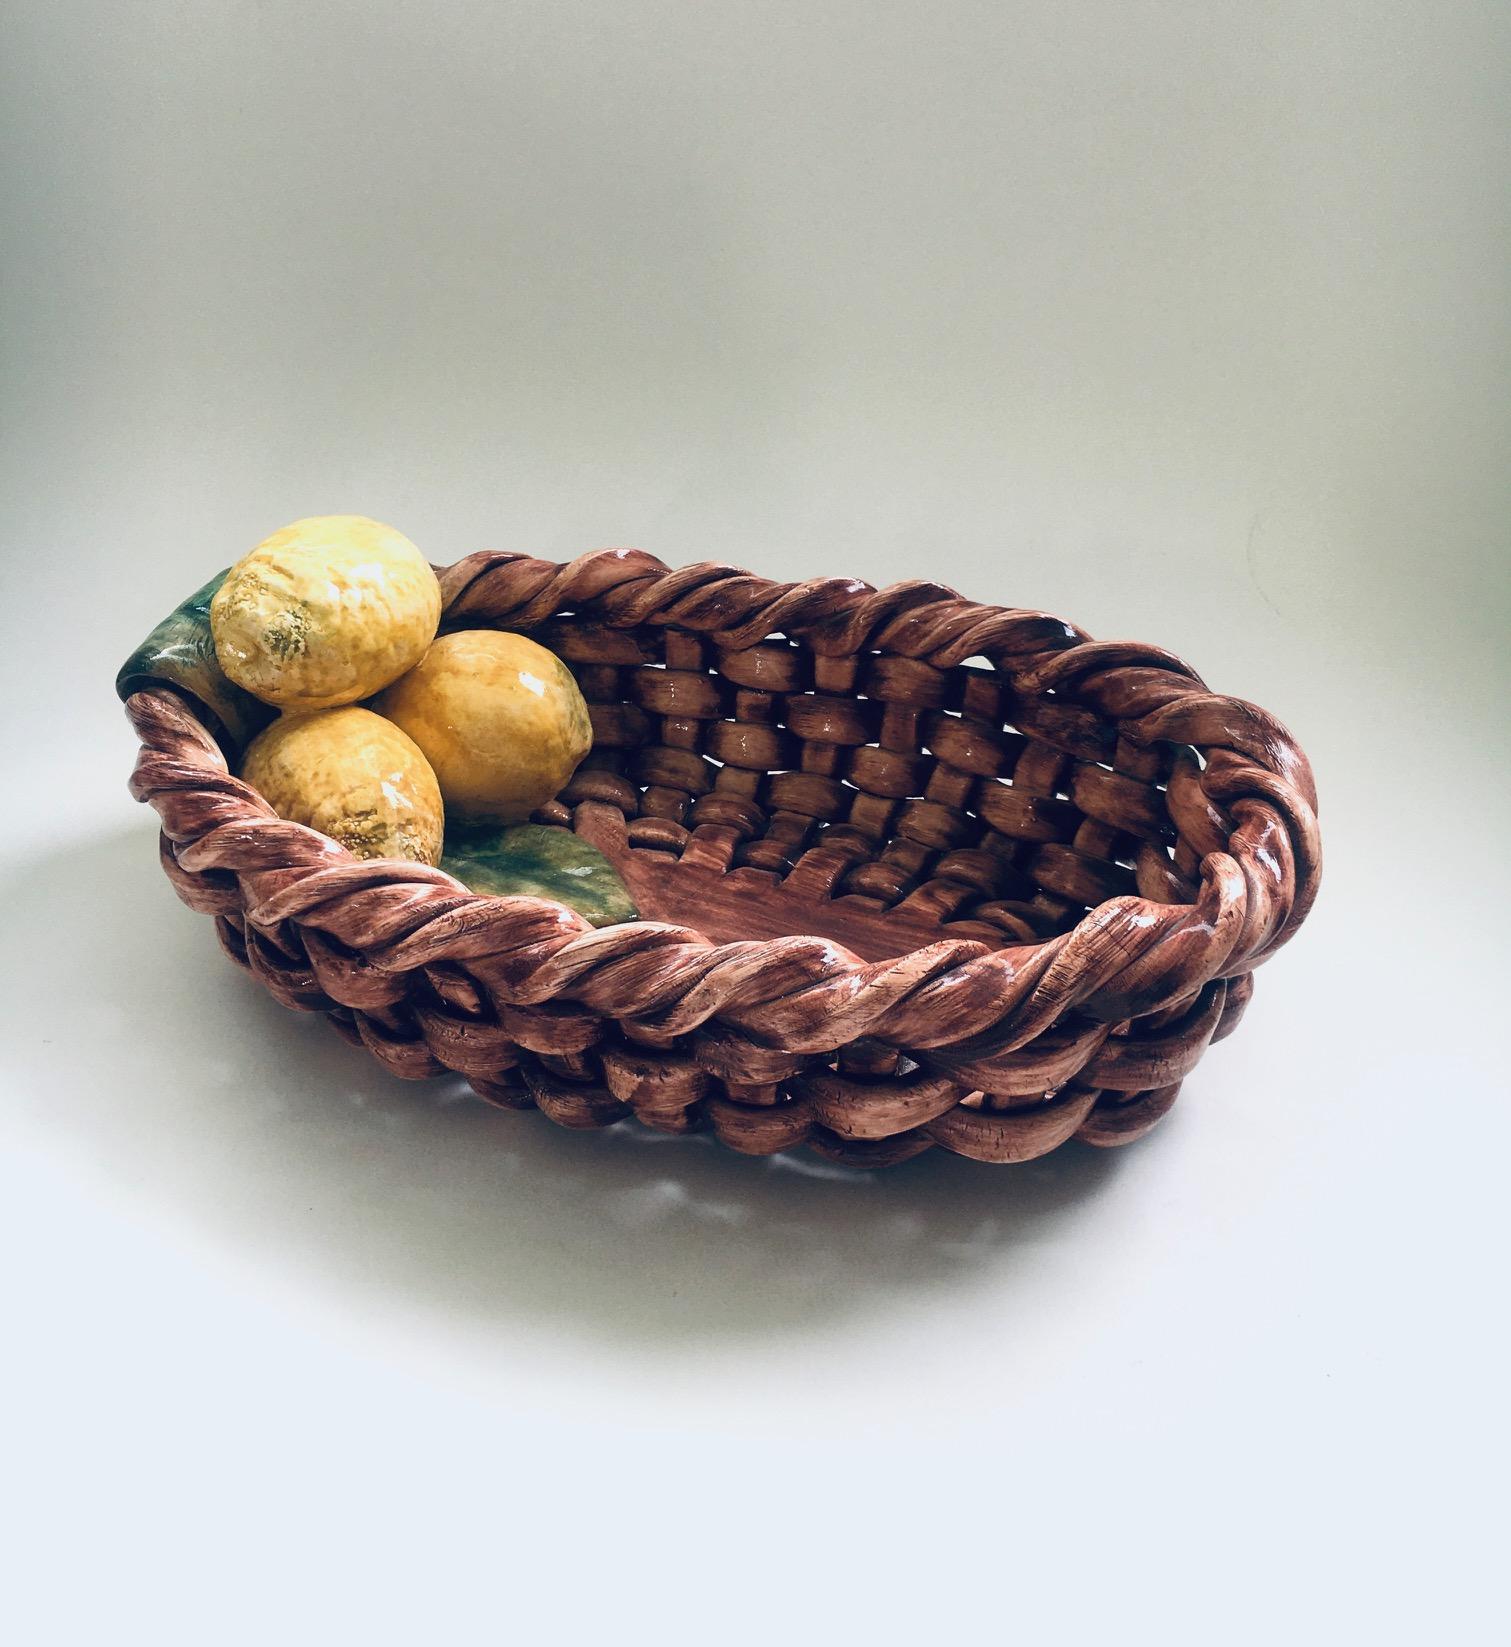 Vintage Art Studio Pottery Large Citrus Fruit Dish Bowl by J. Santos for Alcobaca Portugal 1950's. Braided and twisted handmade pottery dish with 3 lemons and leaf on ceramic basket. Stamped on the bottom with artist name and company name. Brown